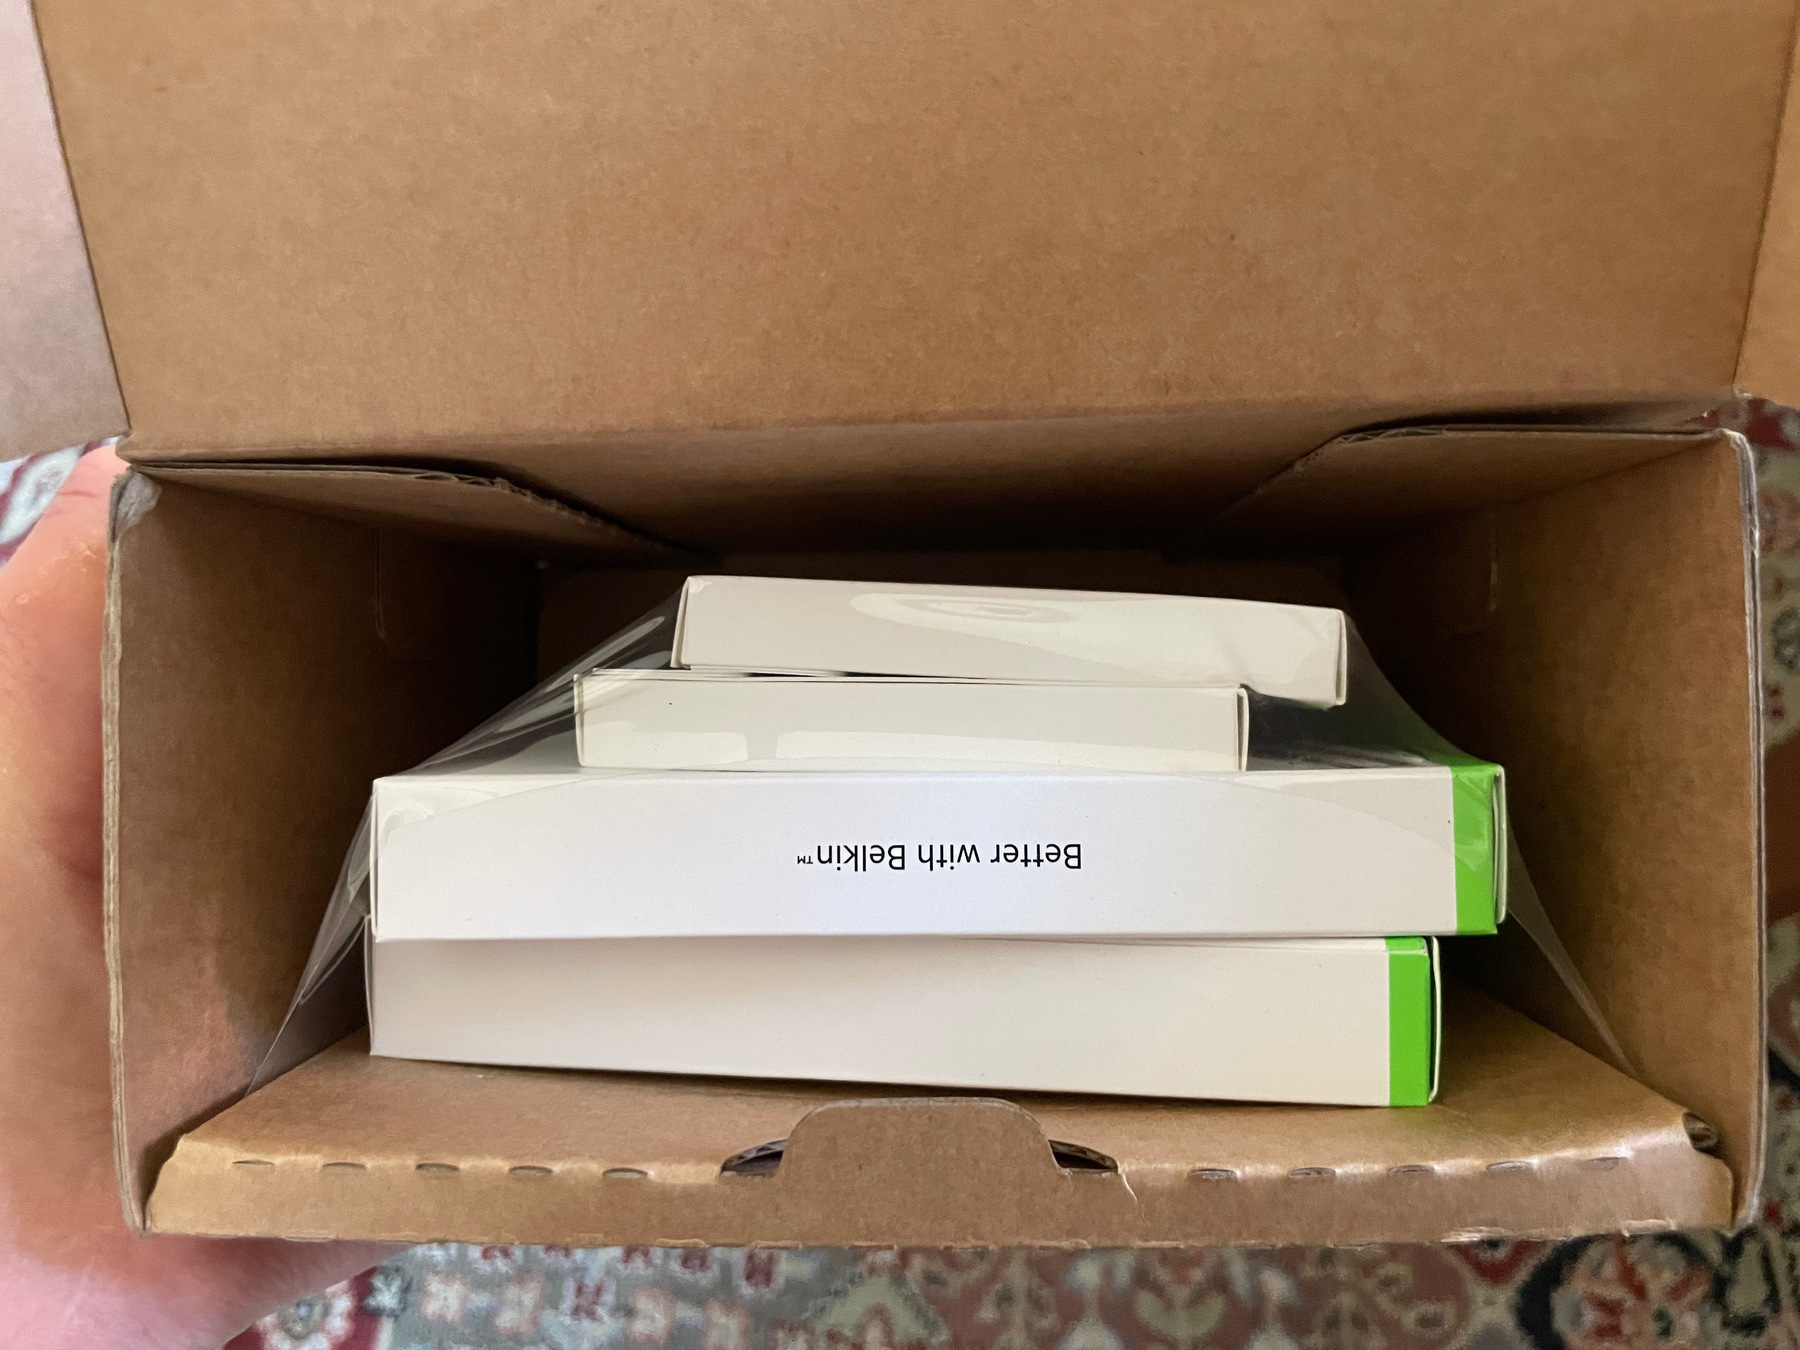 Inner boxes were damaged in packing